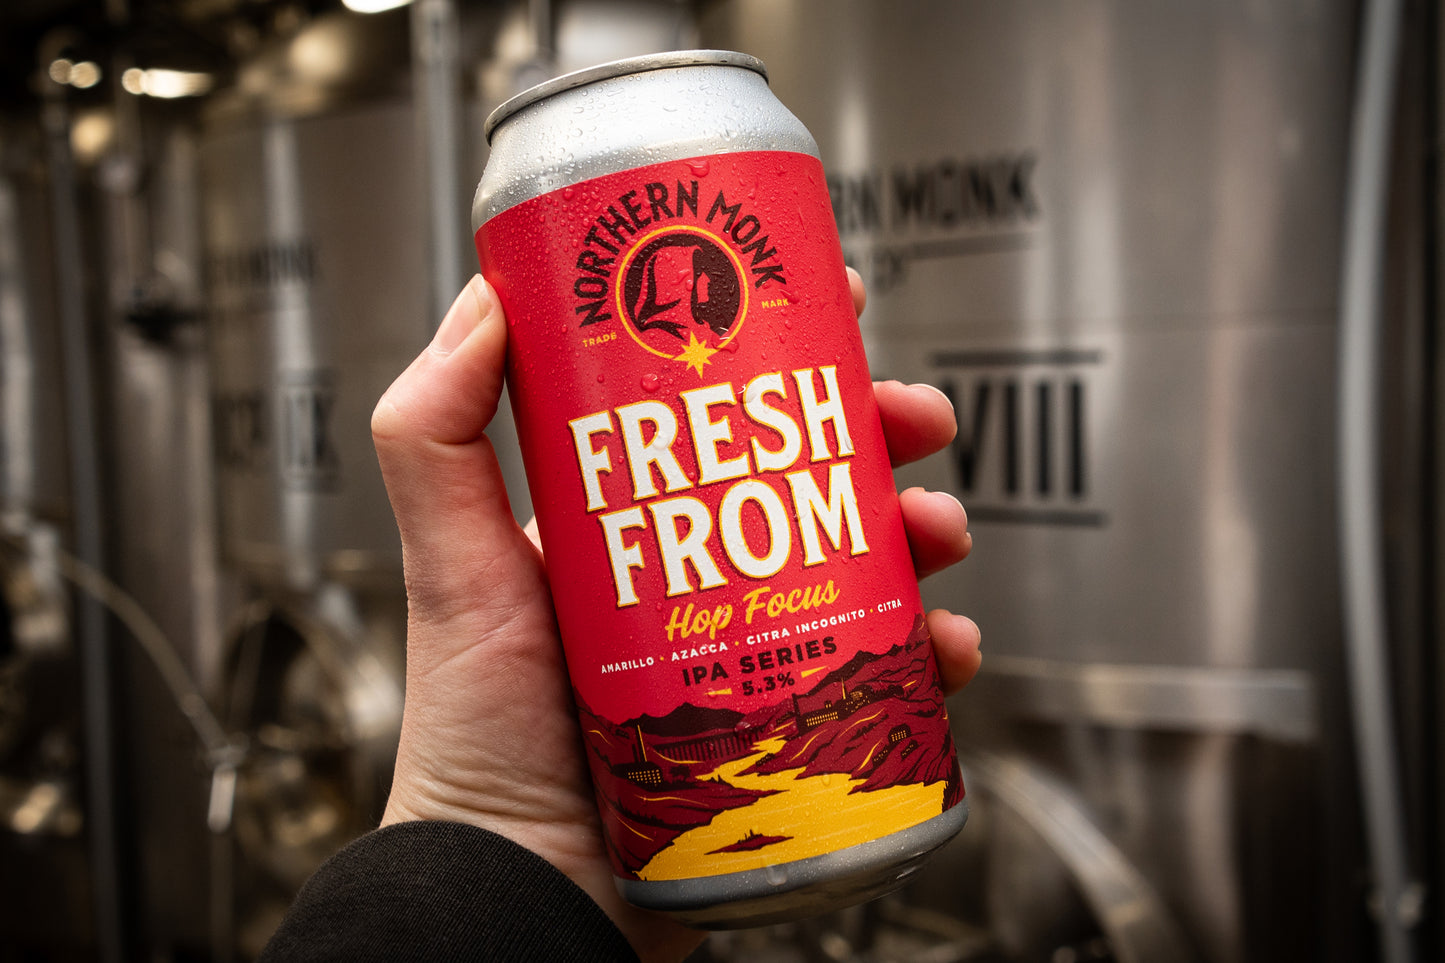 6 PACK // FRESH FROM FOUR // IPA